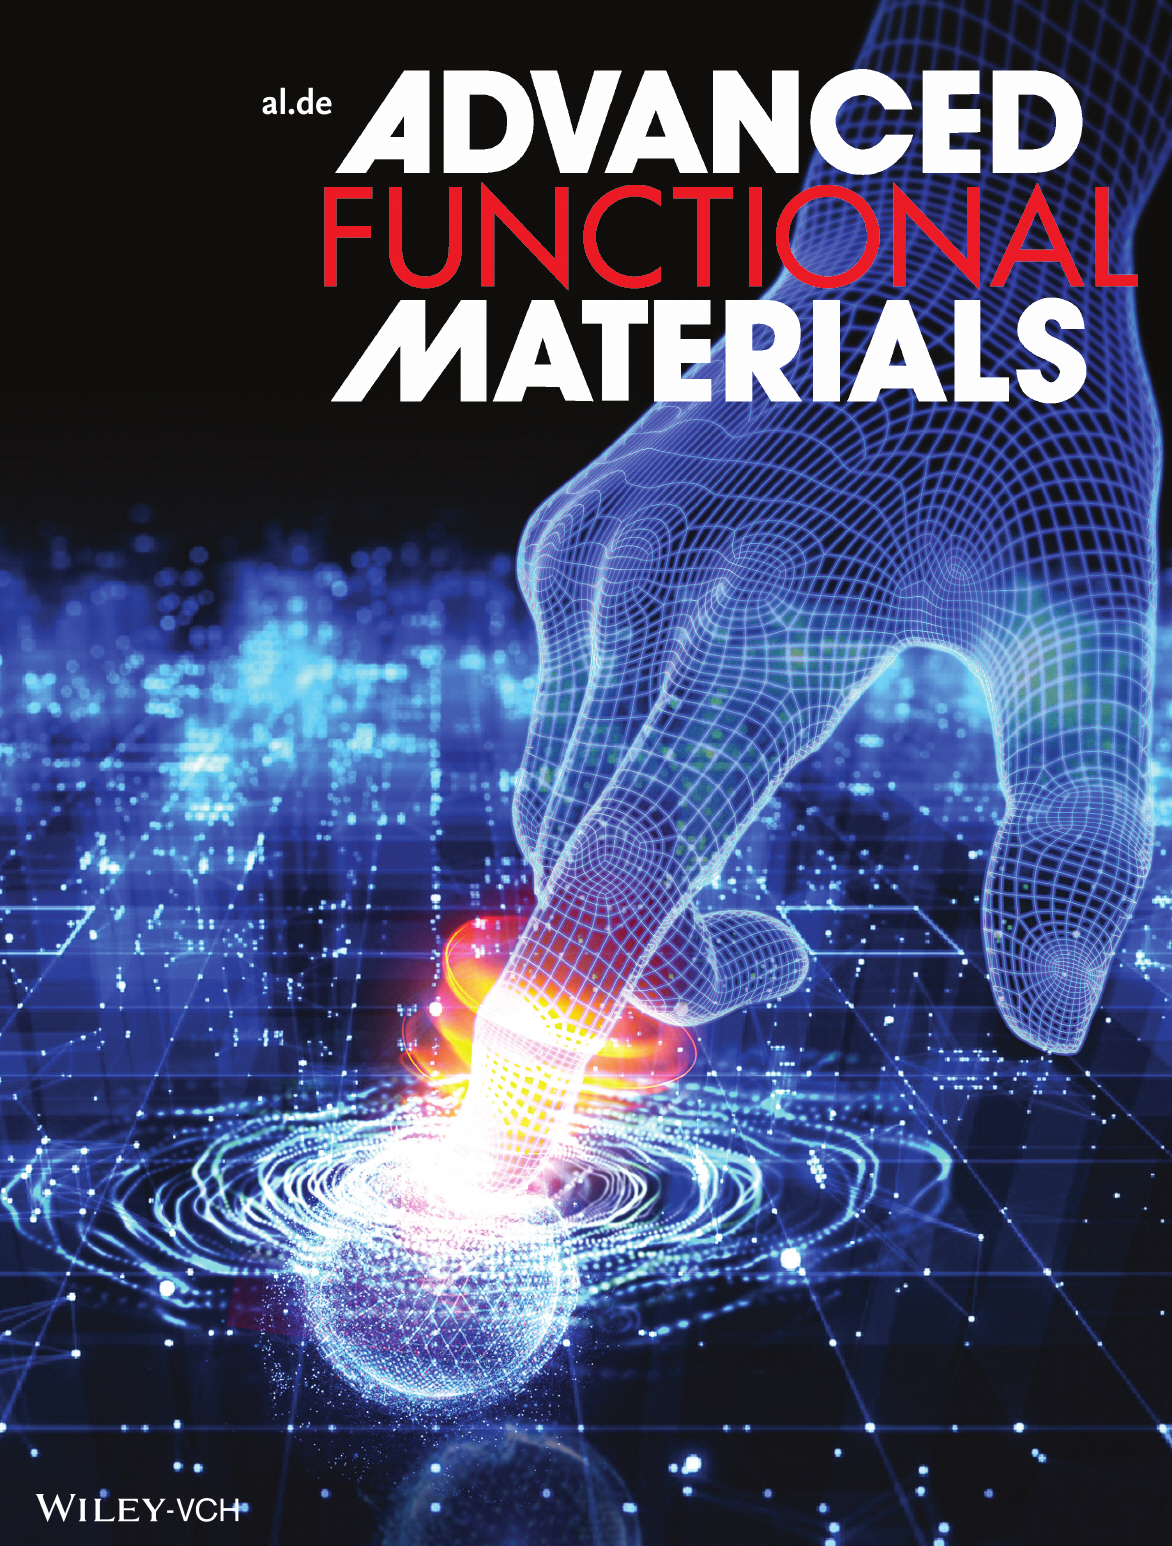 Their findings have been featured on the front cover of the September 2021 issue of leading science journal, Advanced Functional Materials.